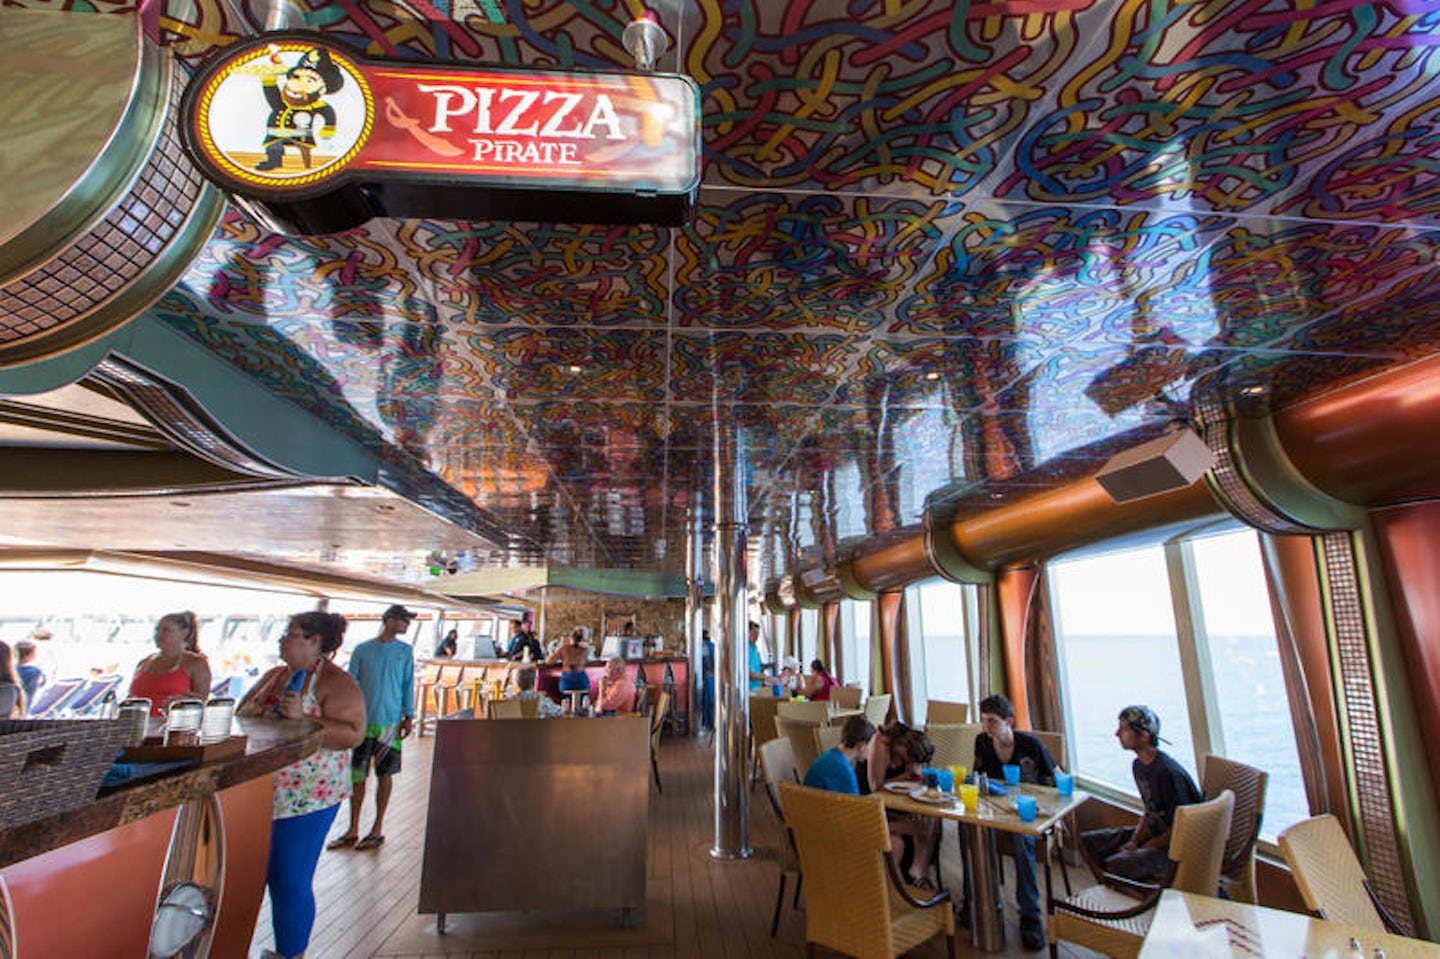 Pizza Pirate on Carnival Freedom